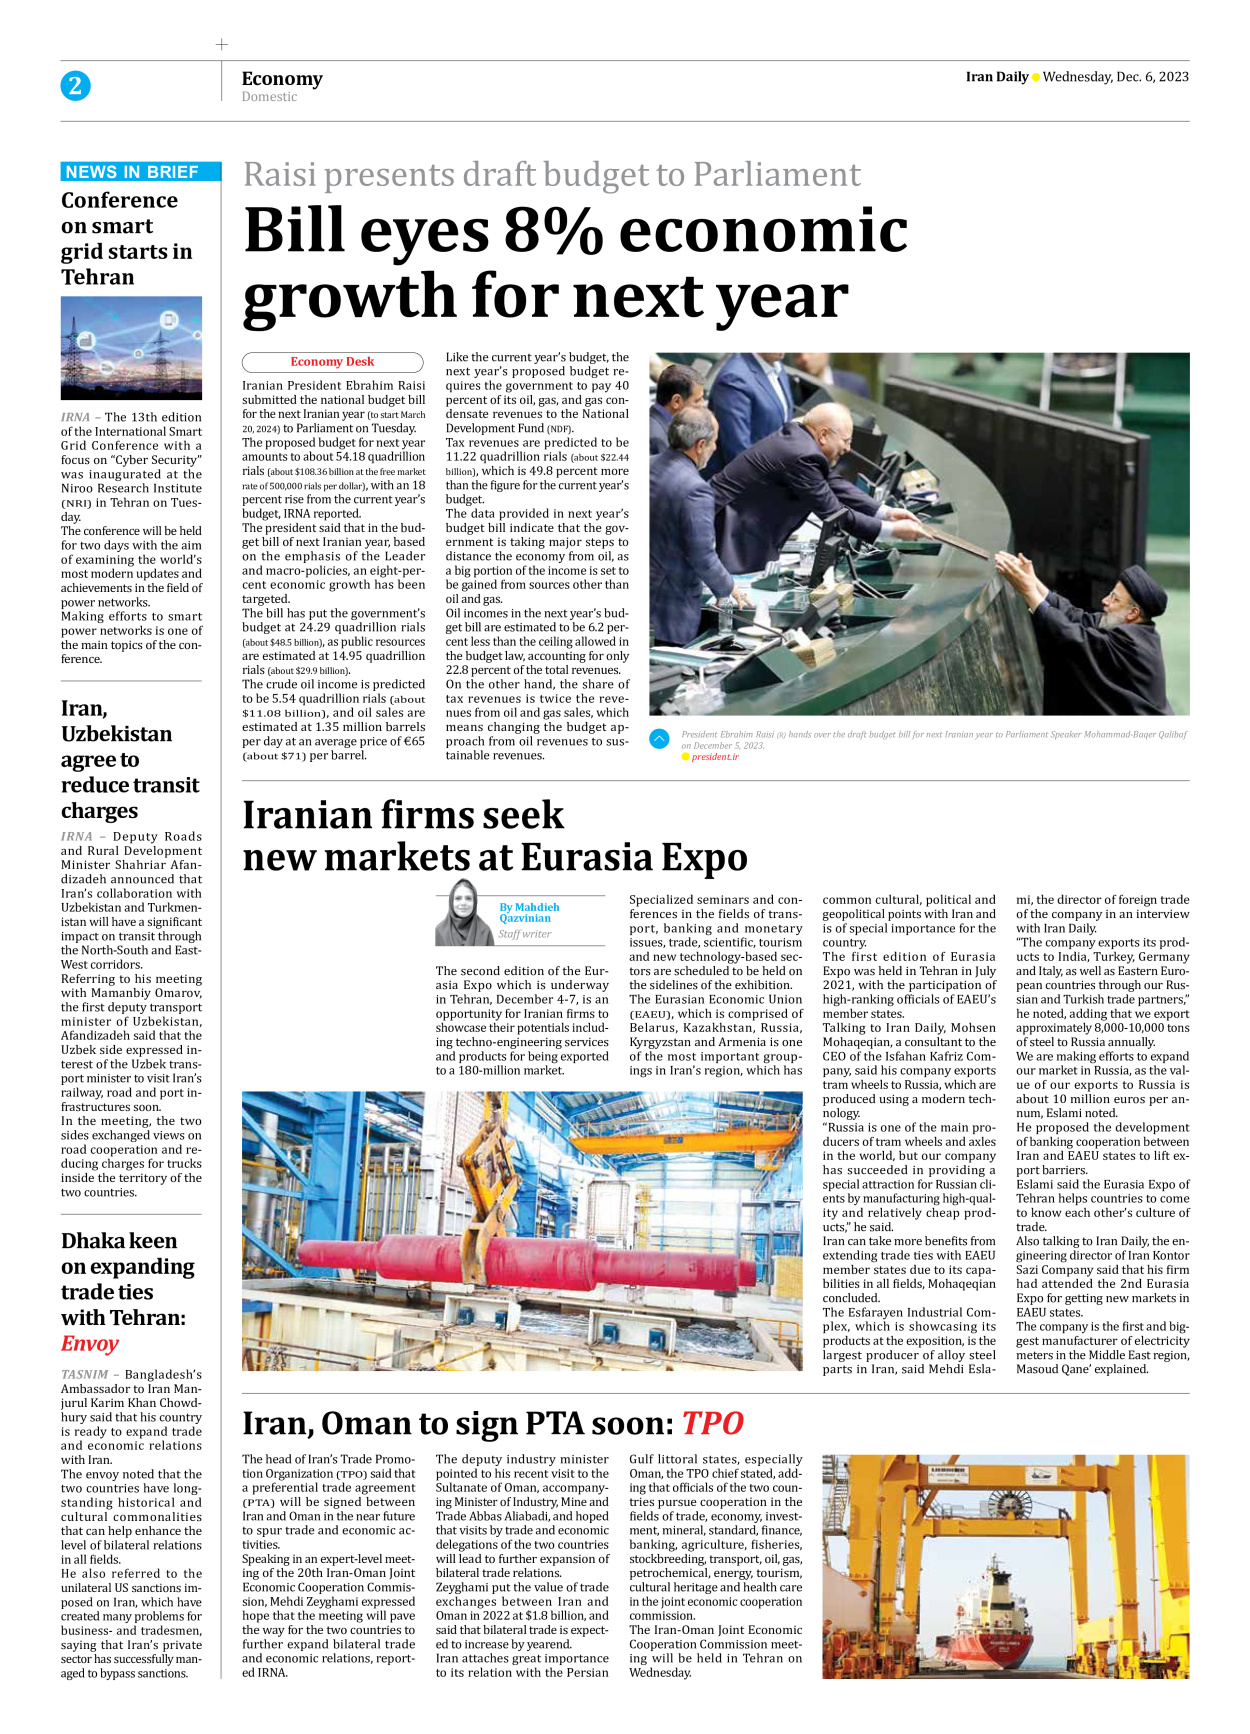 Iran Daily - Number Seven Thousand Four Hundred and Fifty Three - 06 December 2023 - Page 2